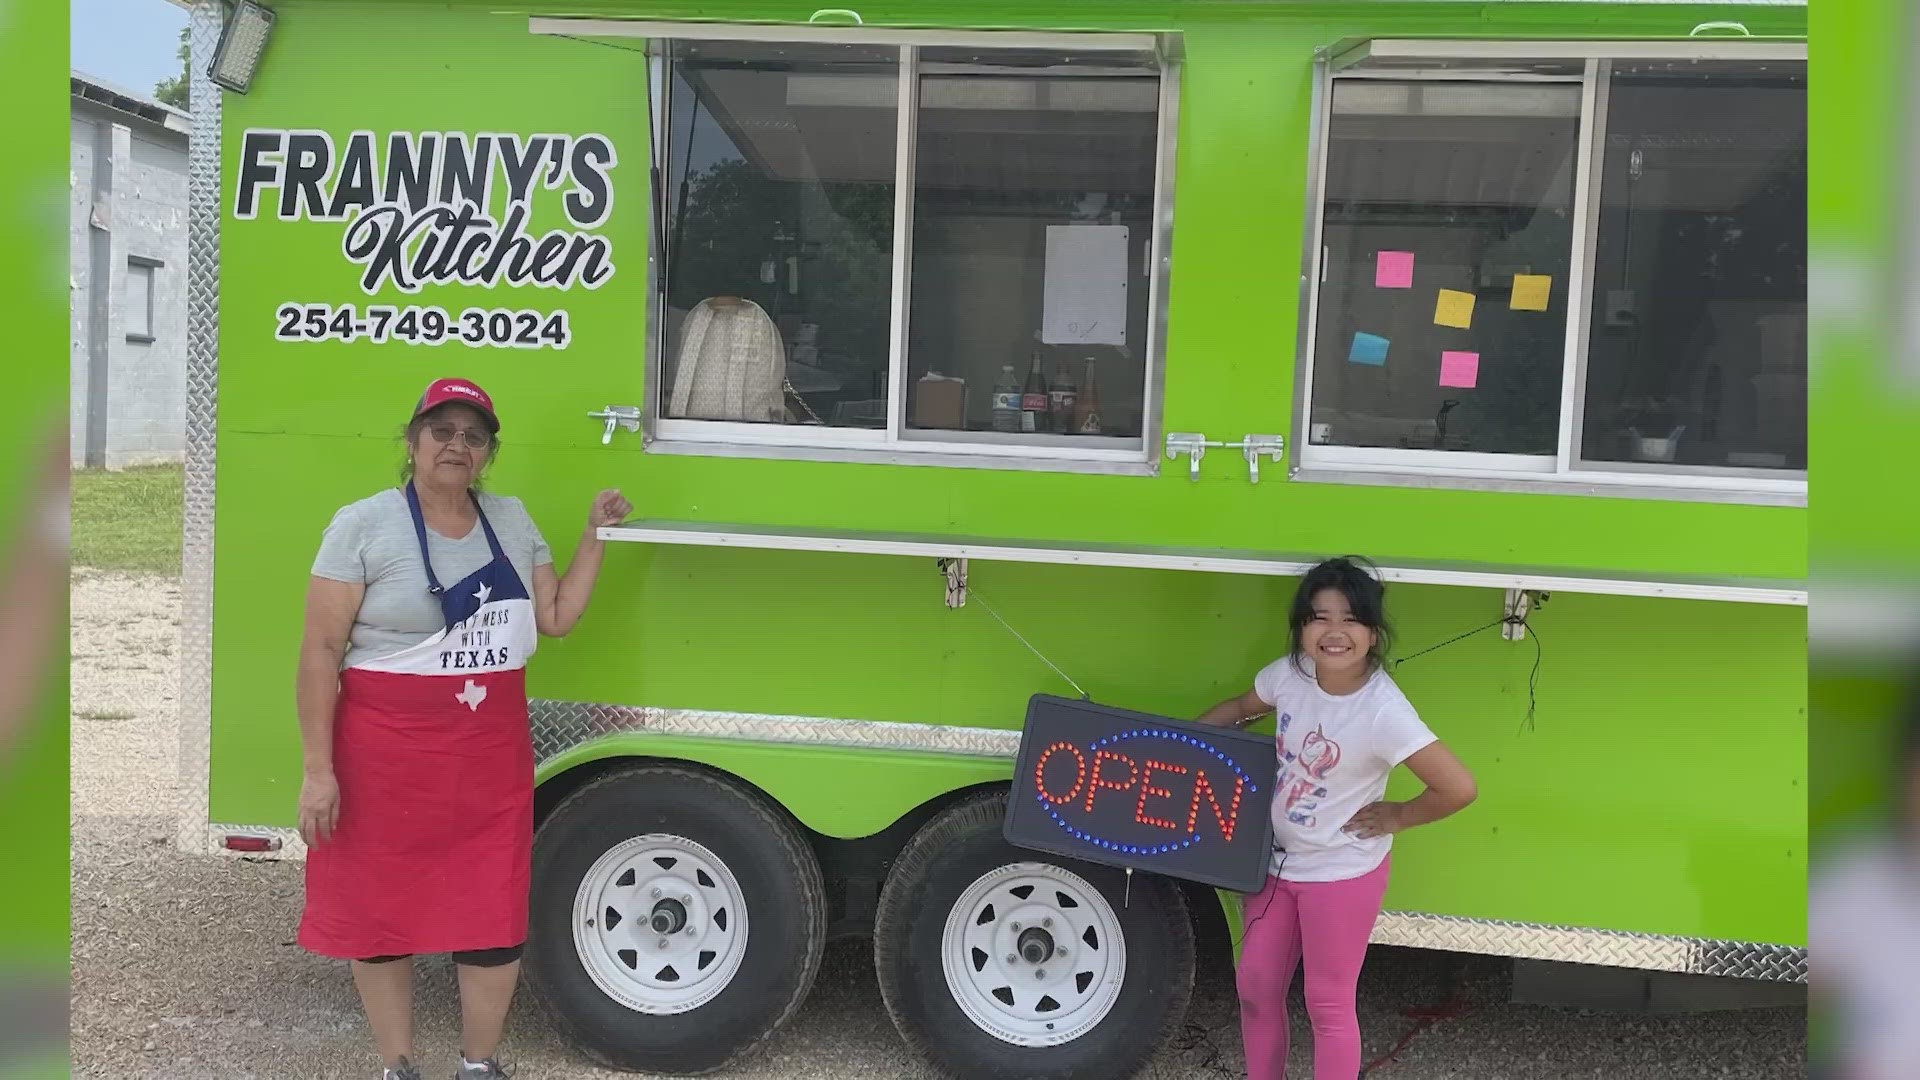 A Valley Mills couple opened their first small business called "Frannie's Kitchen" earlier this year. Now, a battle with cancer is making it hard to keep serving.